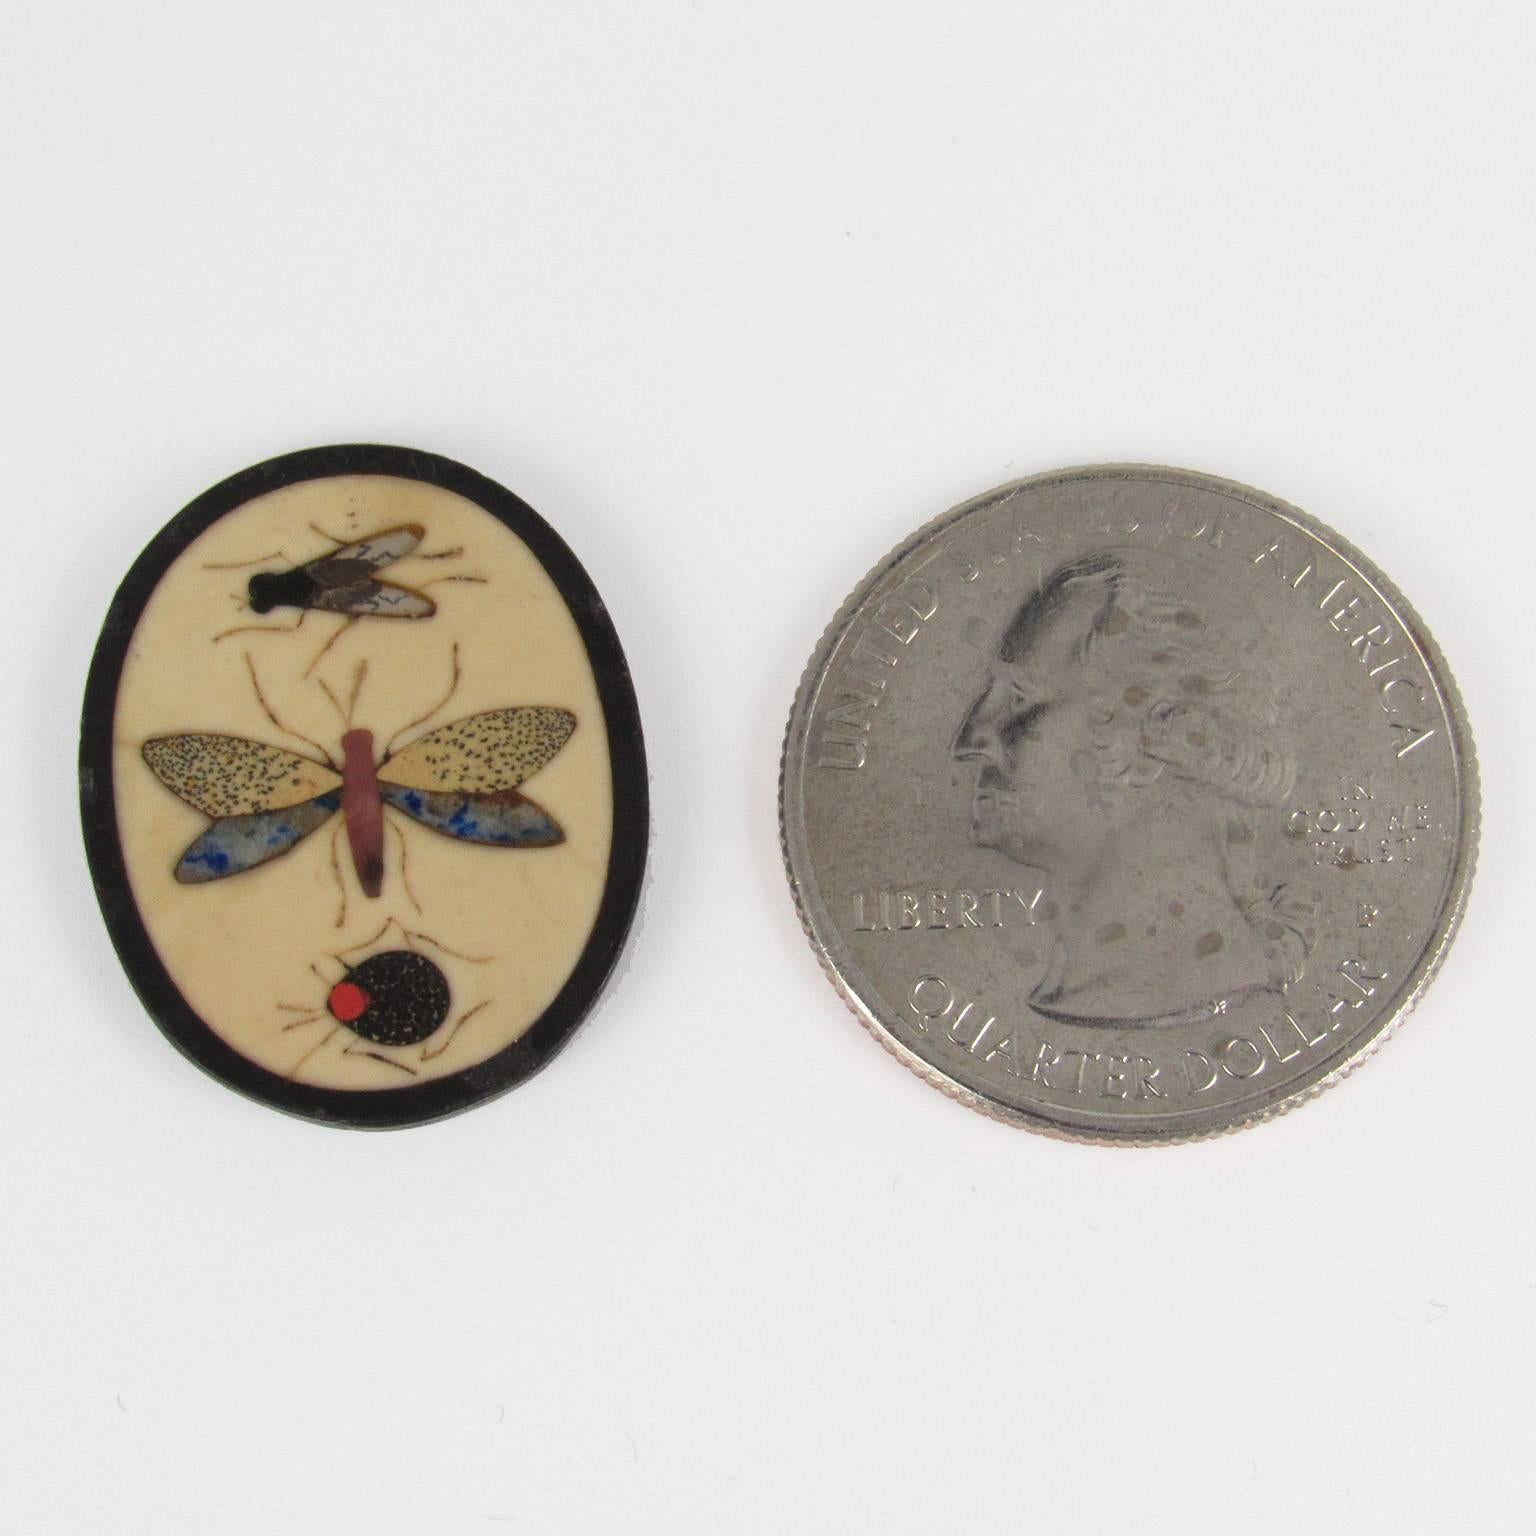 Miniature Italian Pietra Dura insect plaque. Oval with a fly, mosquito and ladybug. Measure: 7/8 x 3/4 inches.